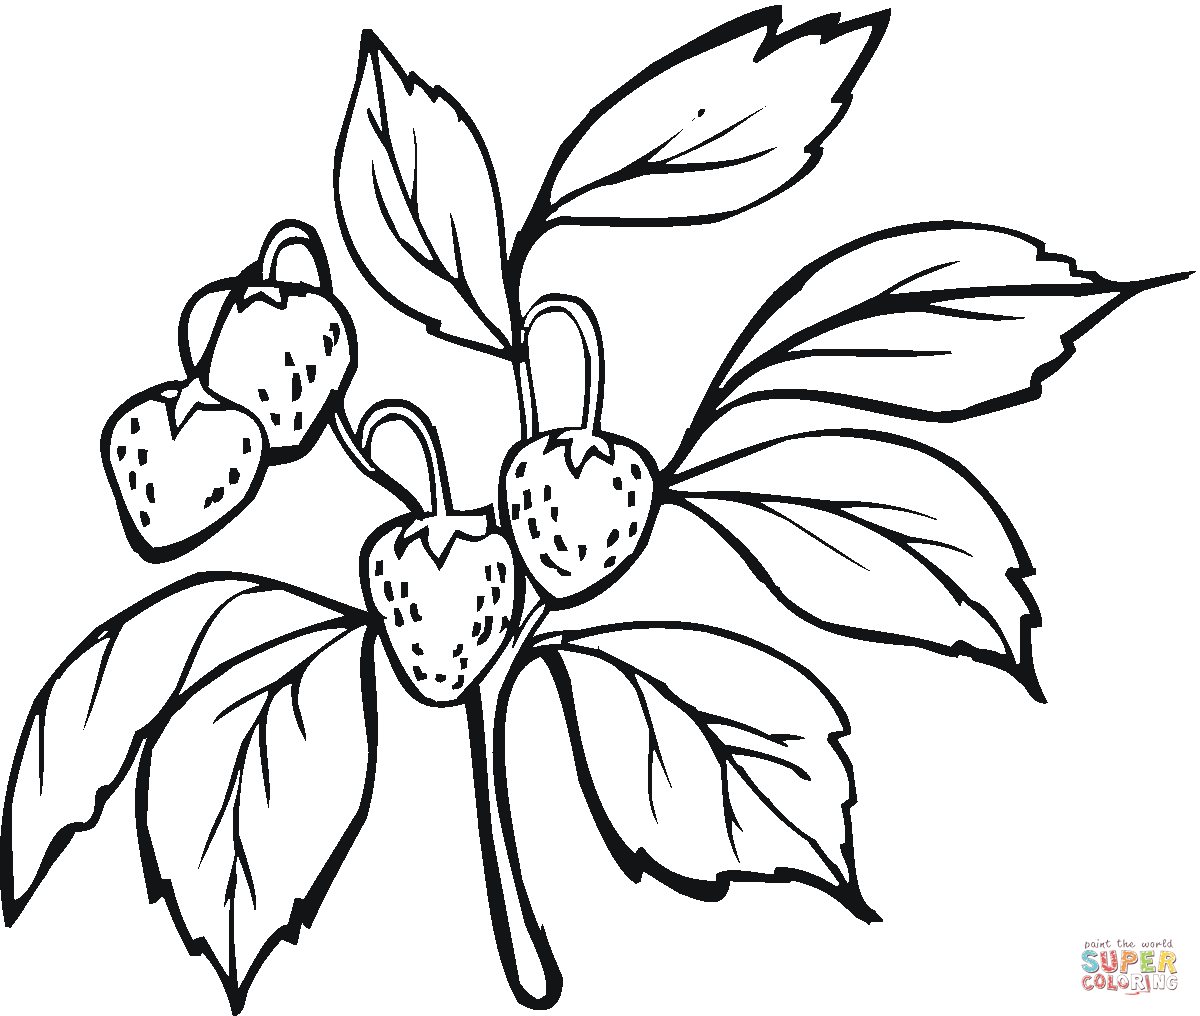 Strawberry coloring pages | Free Coloring Pages